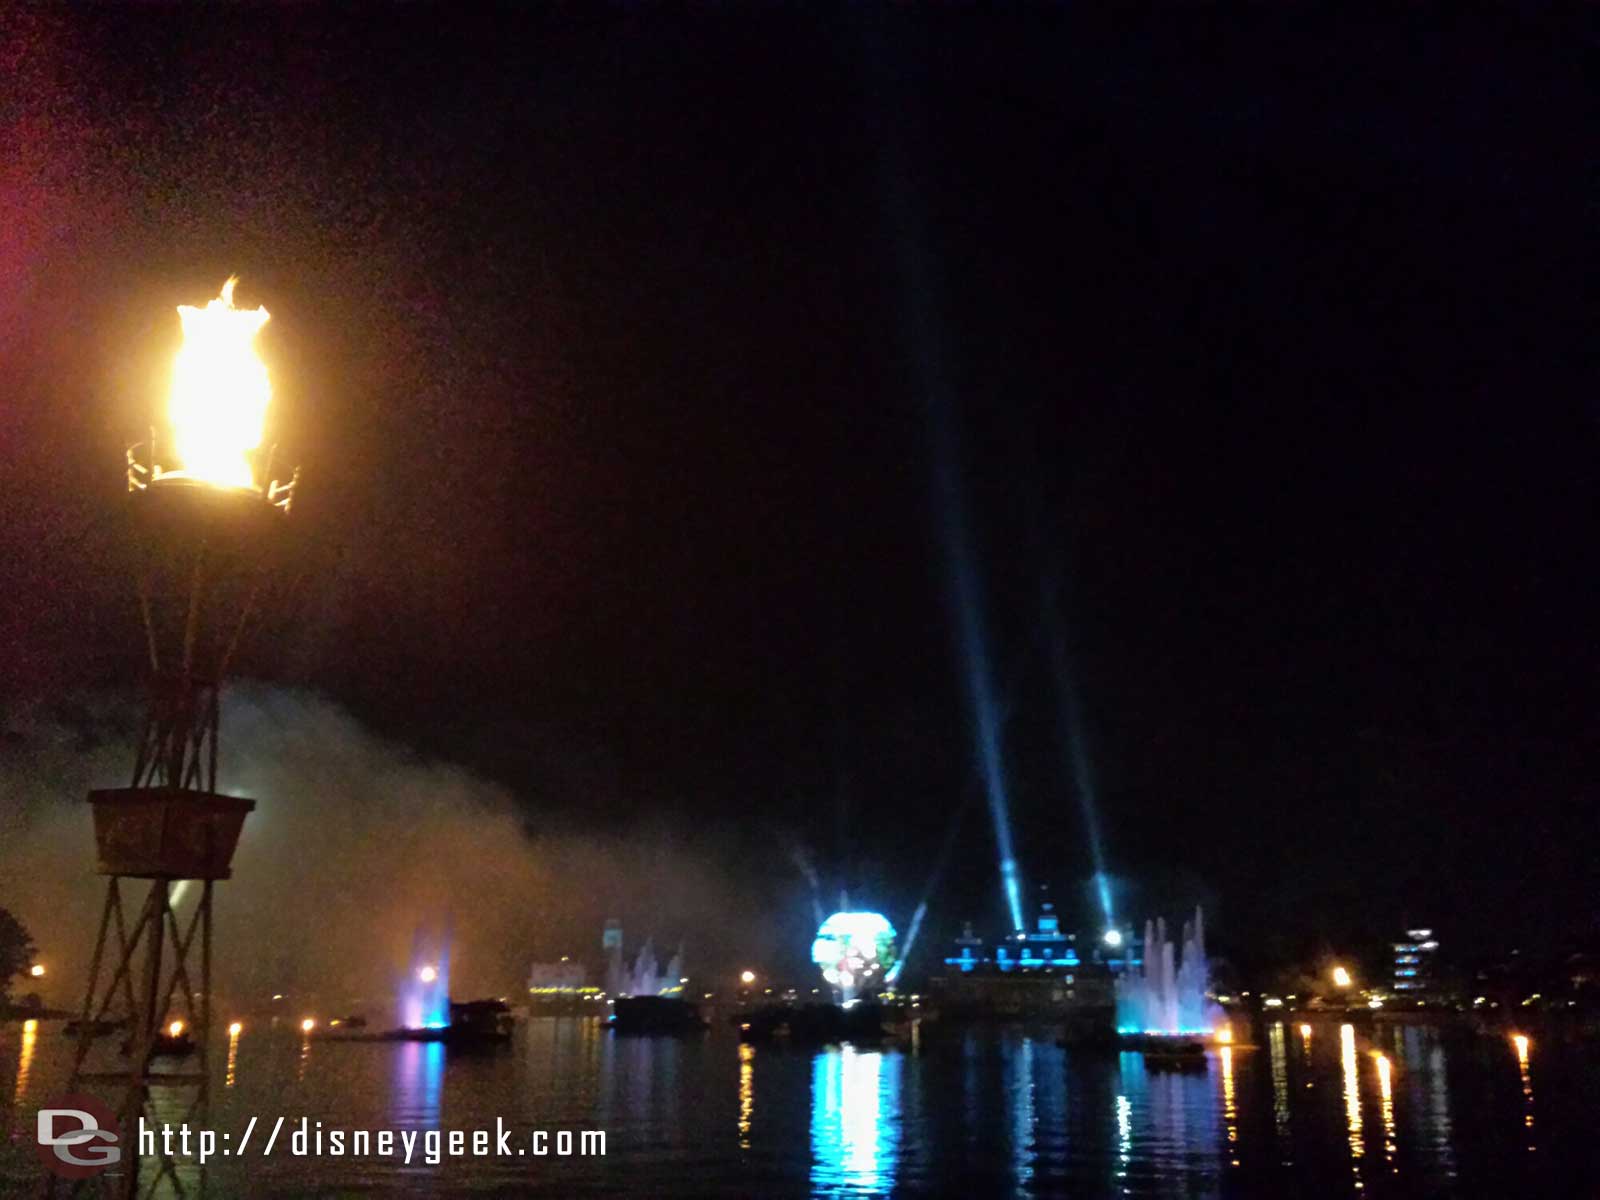 Watched Illuminations Reflections of Earth from the FastPass+ viewing area.